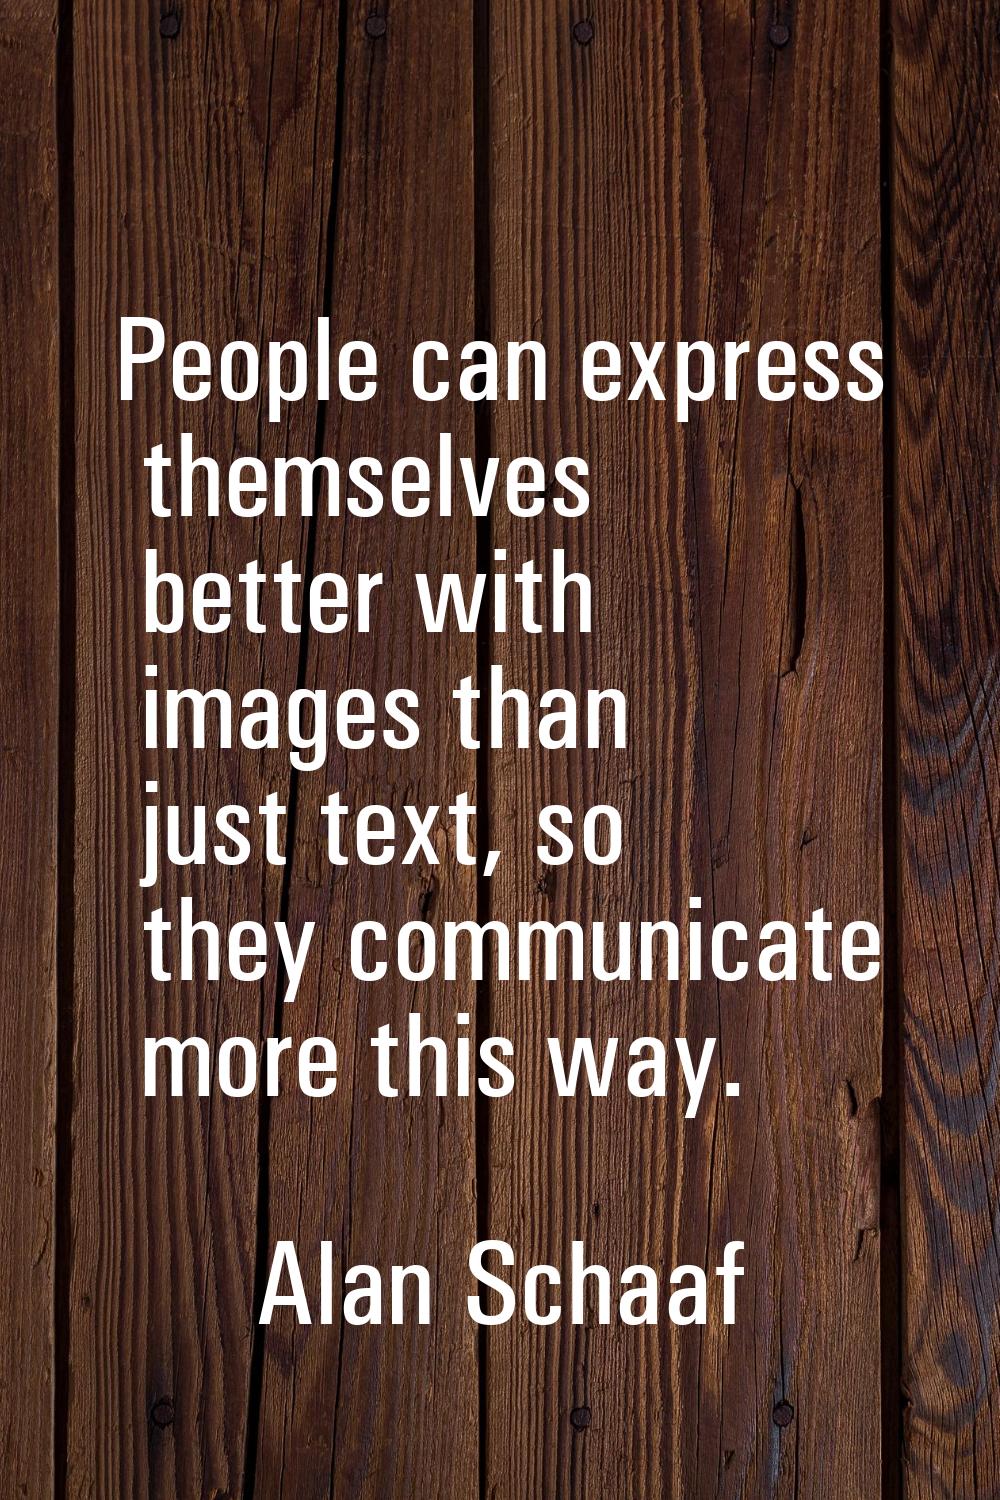 People can express themselves better with images than just text, so they communicate more this way.